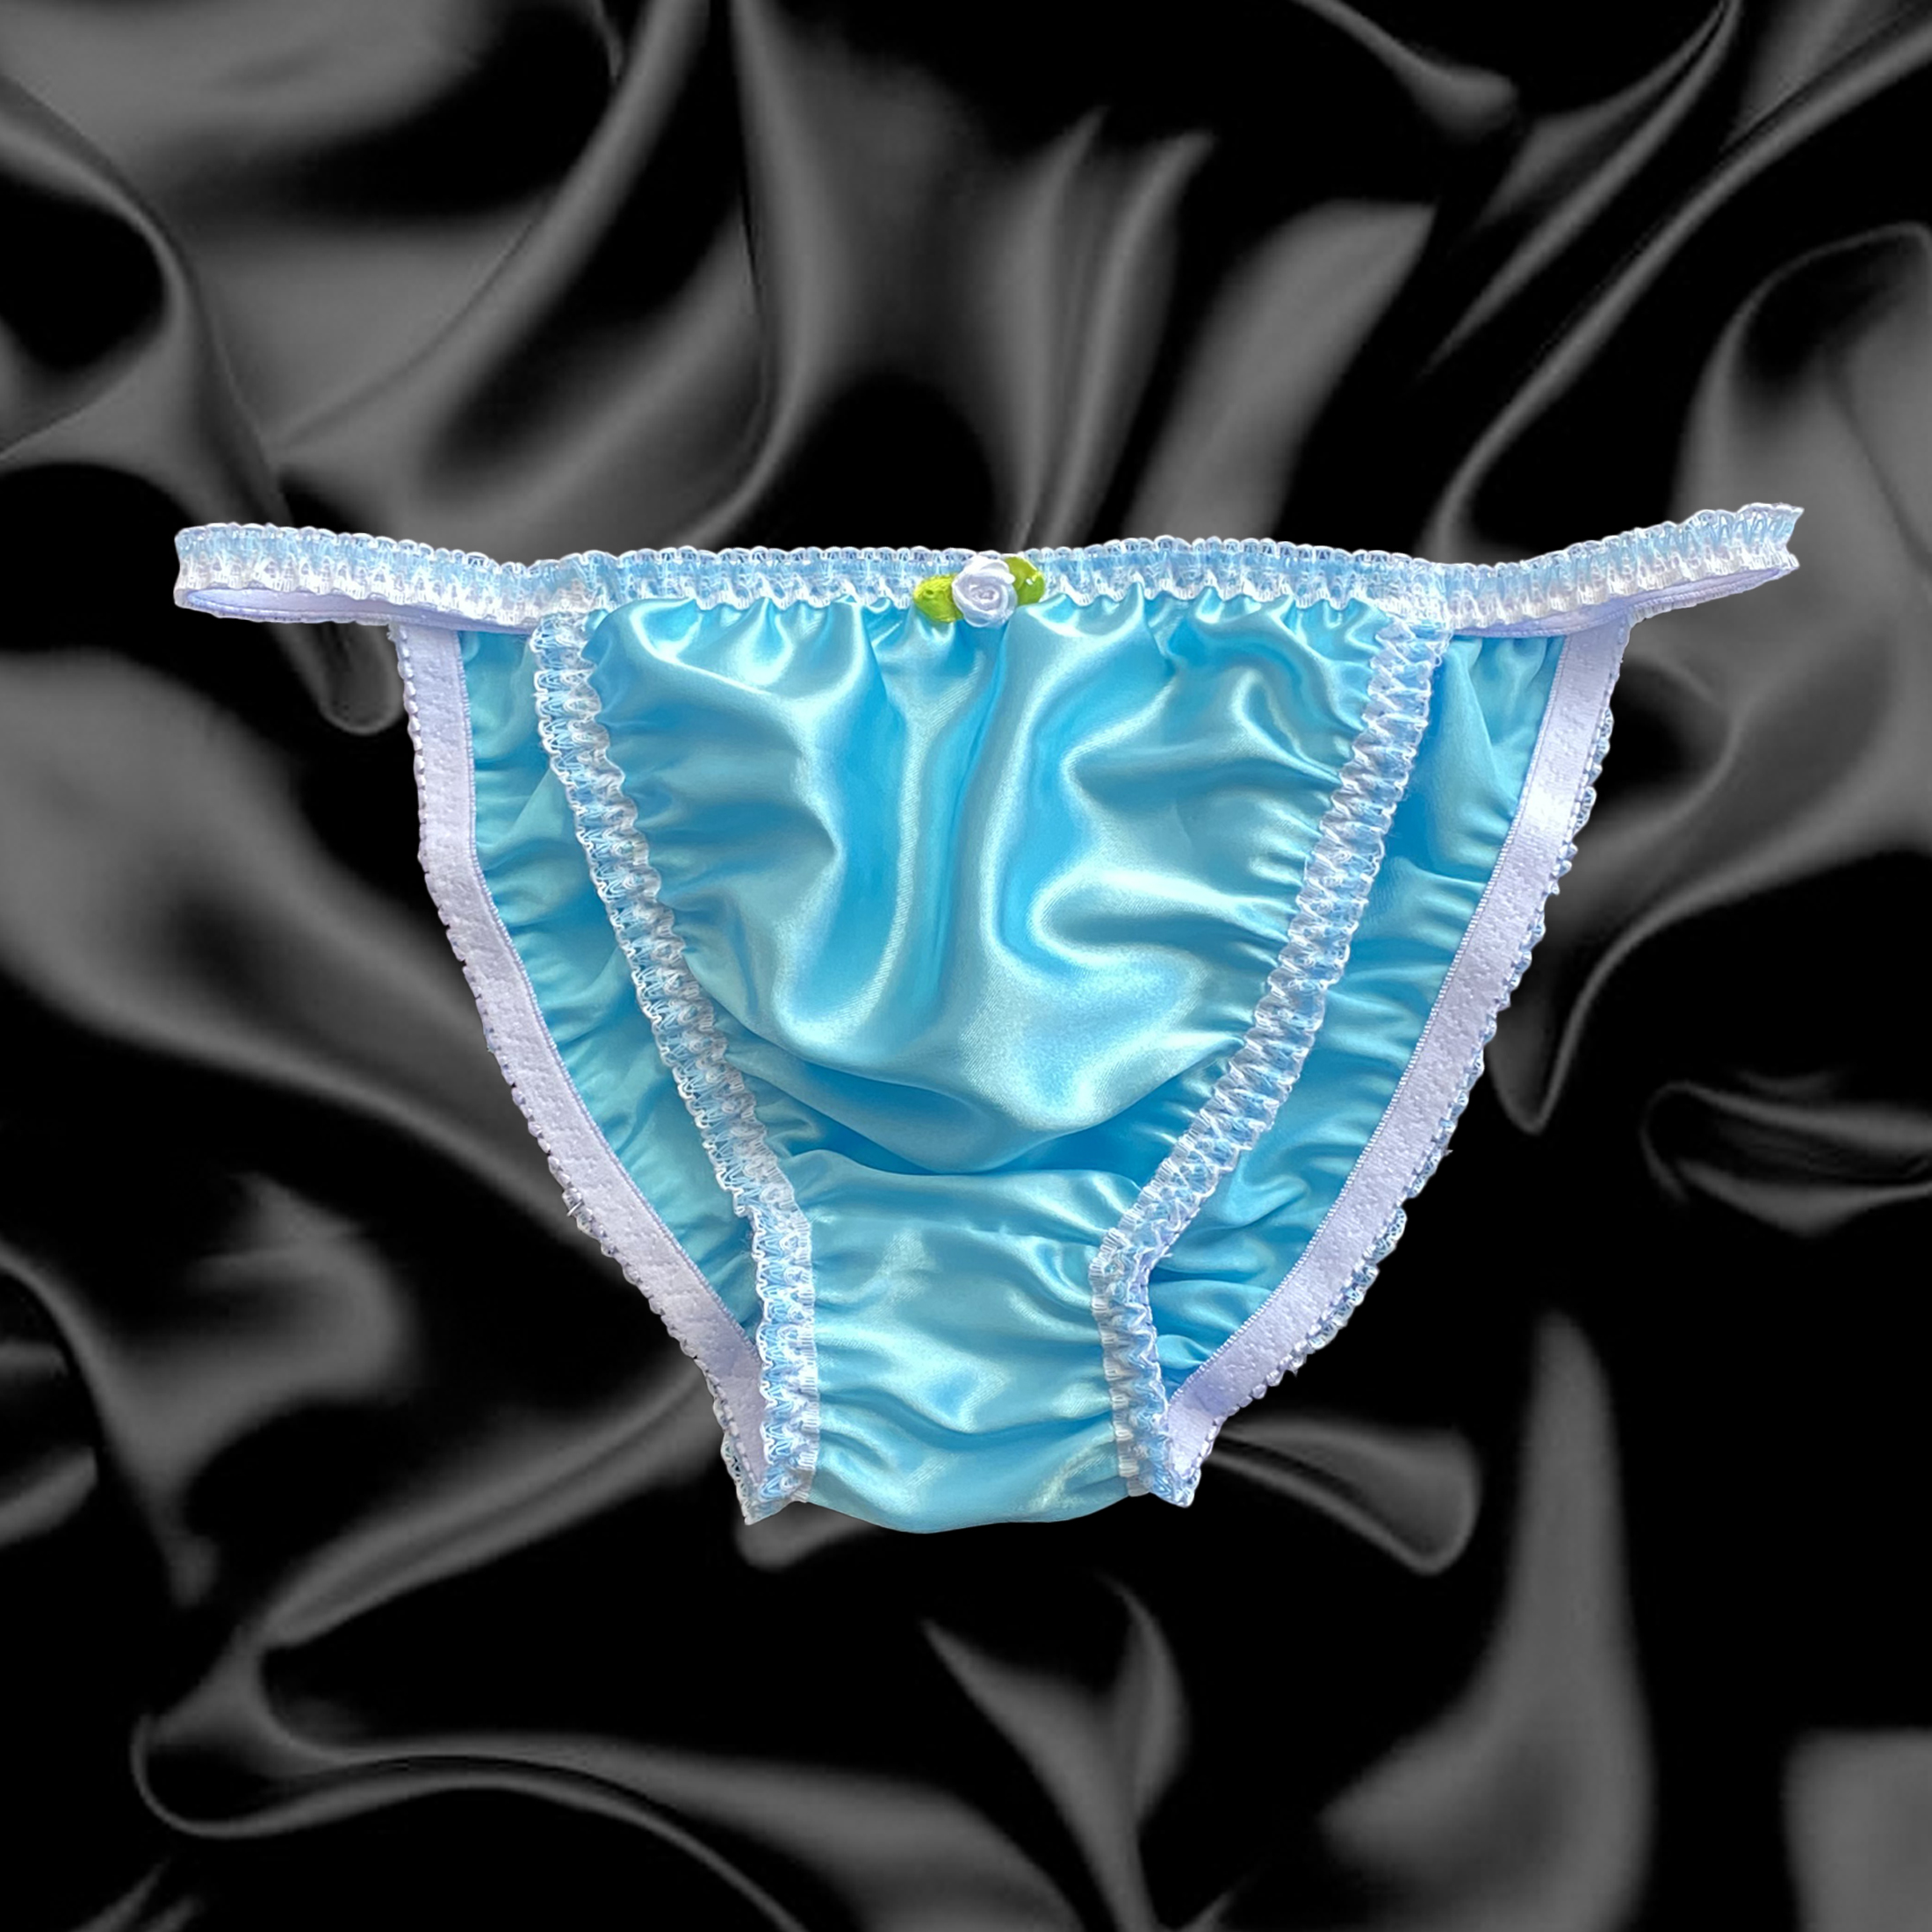 Shop for Blue, Knickers, Sale